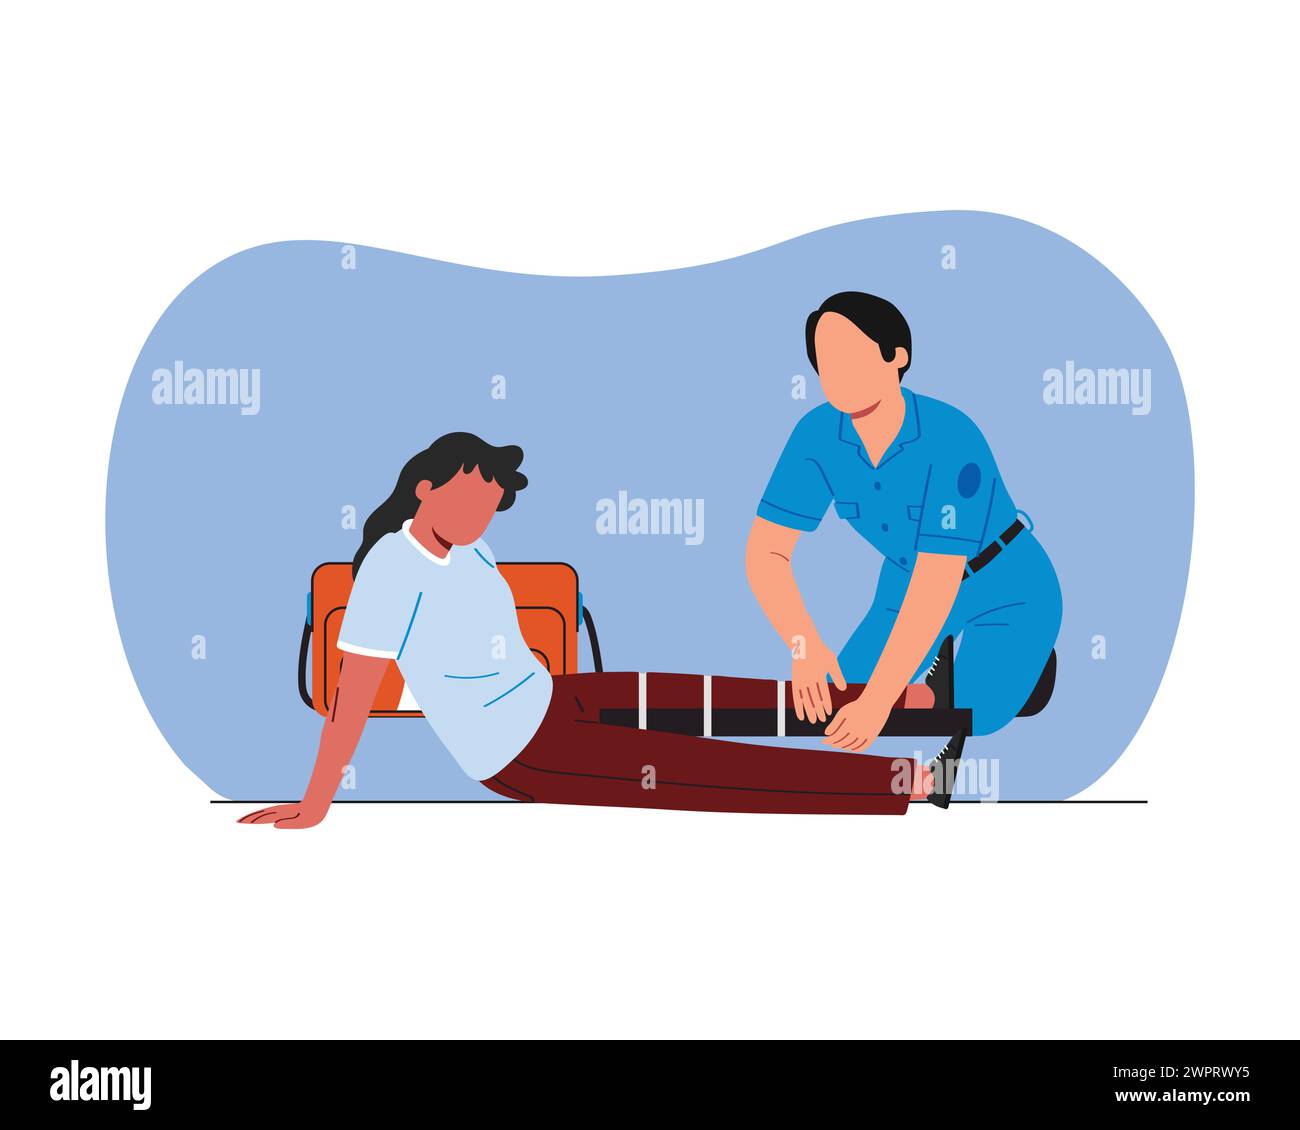 First aid. Doctor or paramedic officer helping patient with fracture in stretcher. Flat style vector design for medical and health care illustration. Stock Vector